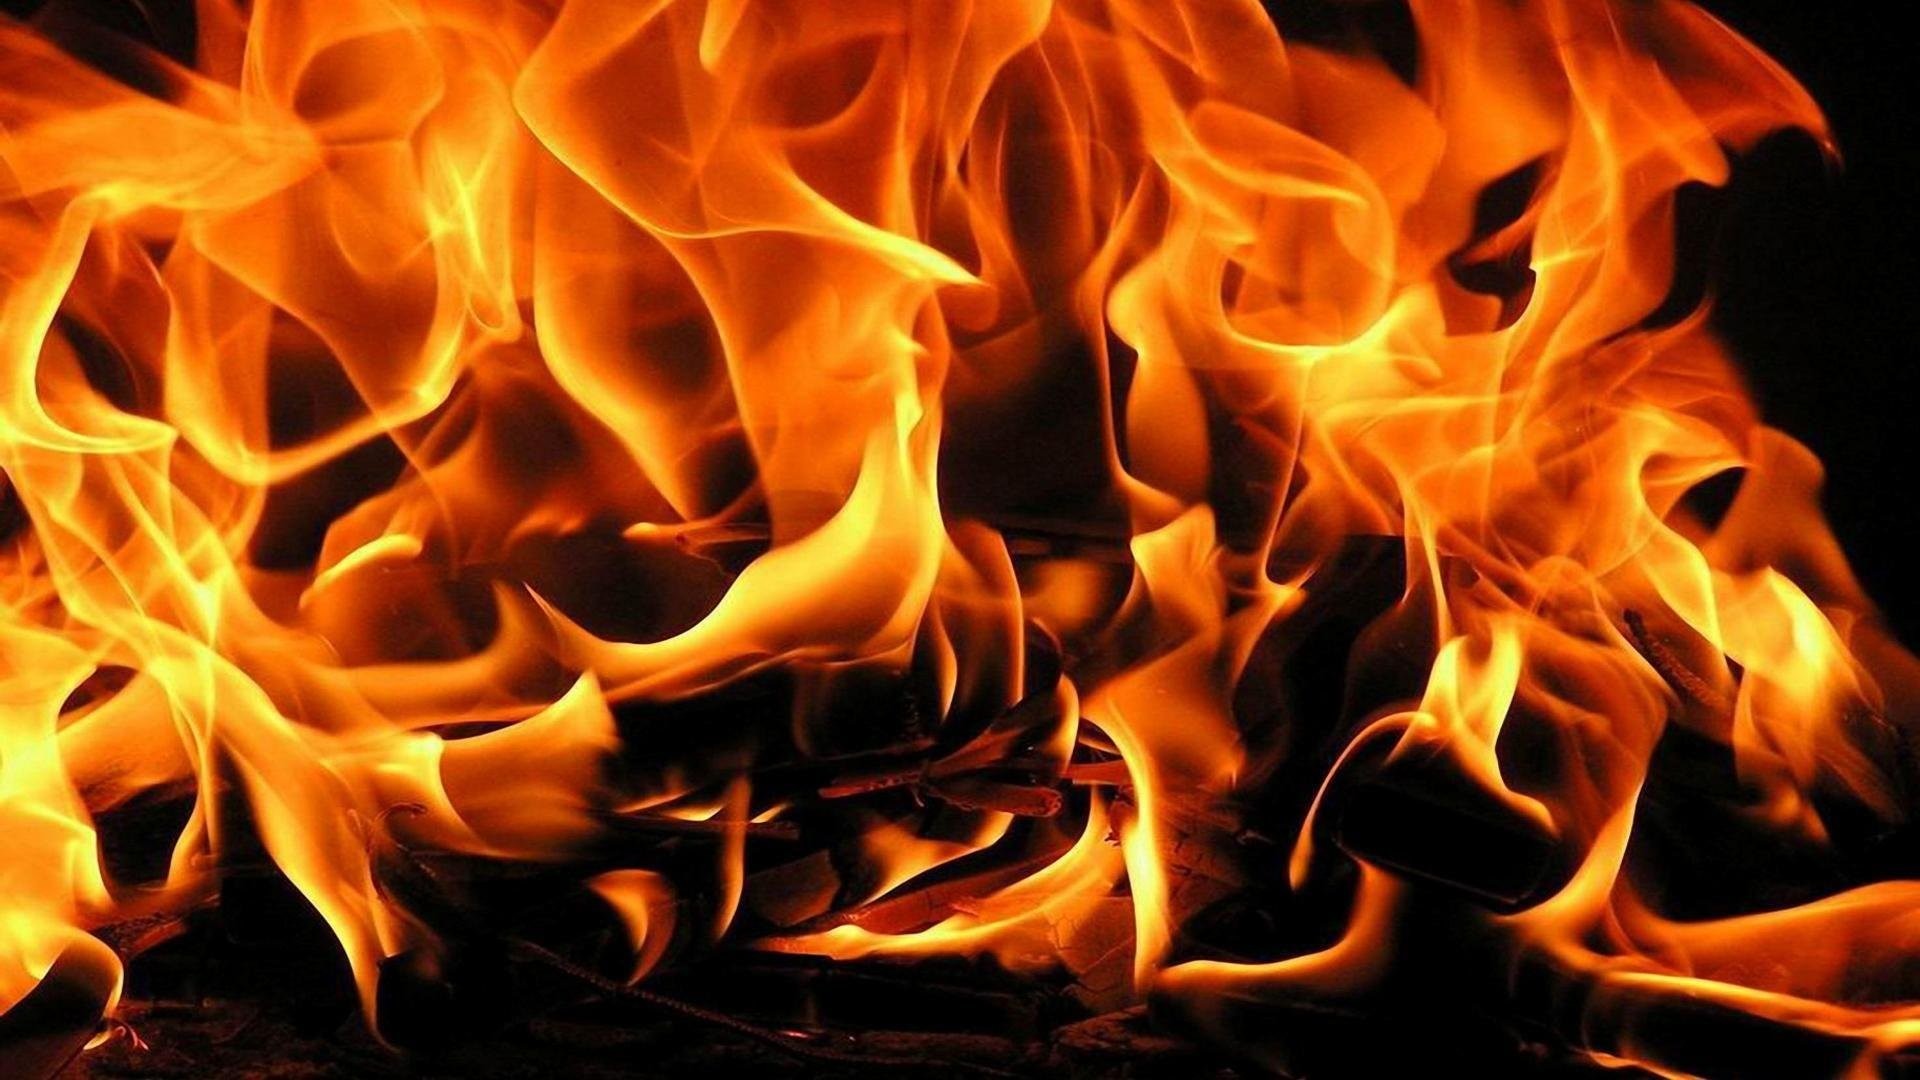 1920x1080 Fire Backgrounds For Photoshop